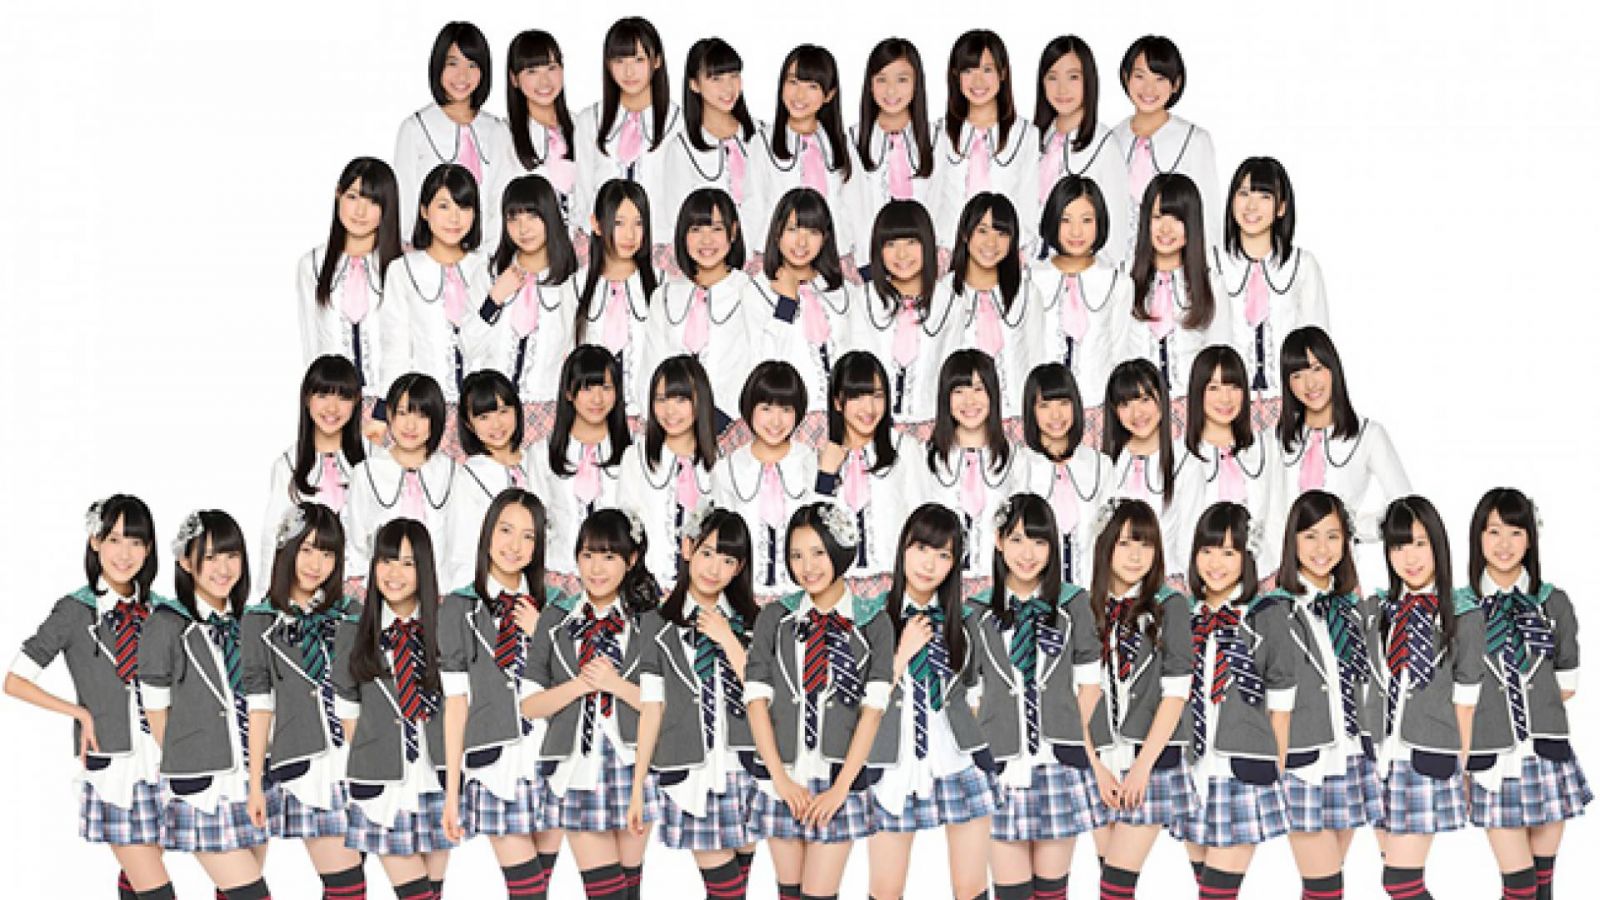 Nowy singiel HKT48 © Universal Music Japan, all rights reserved